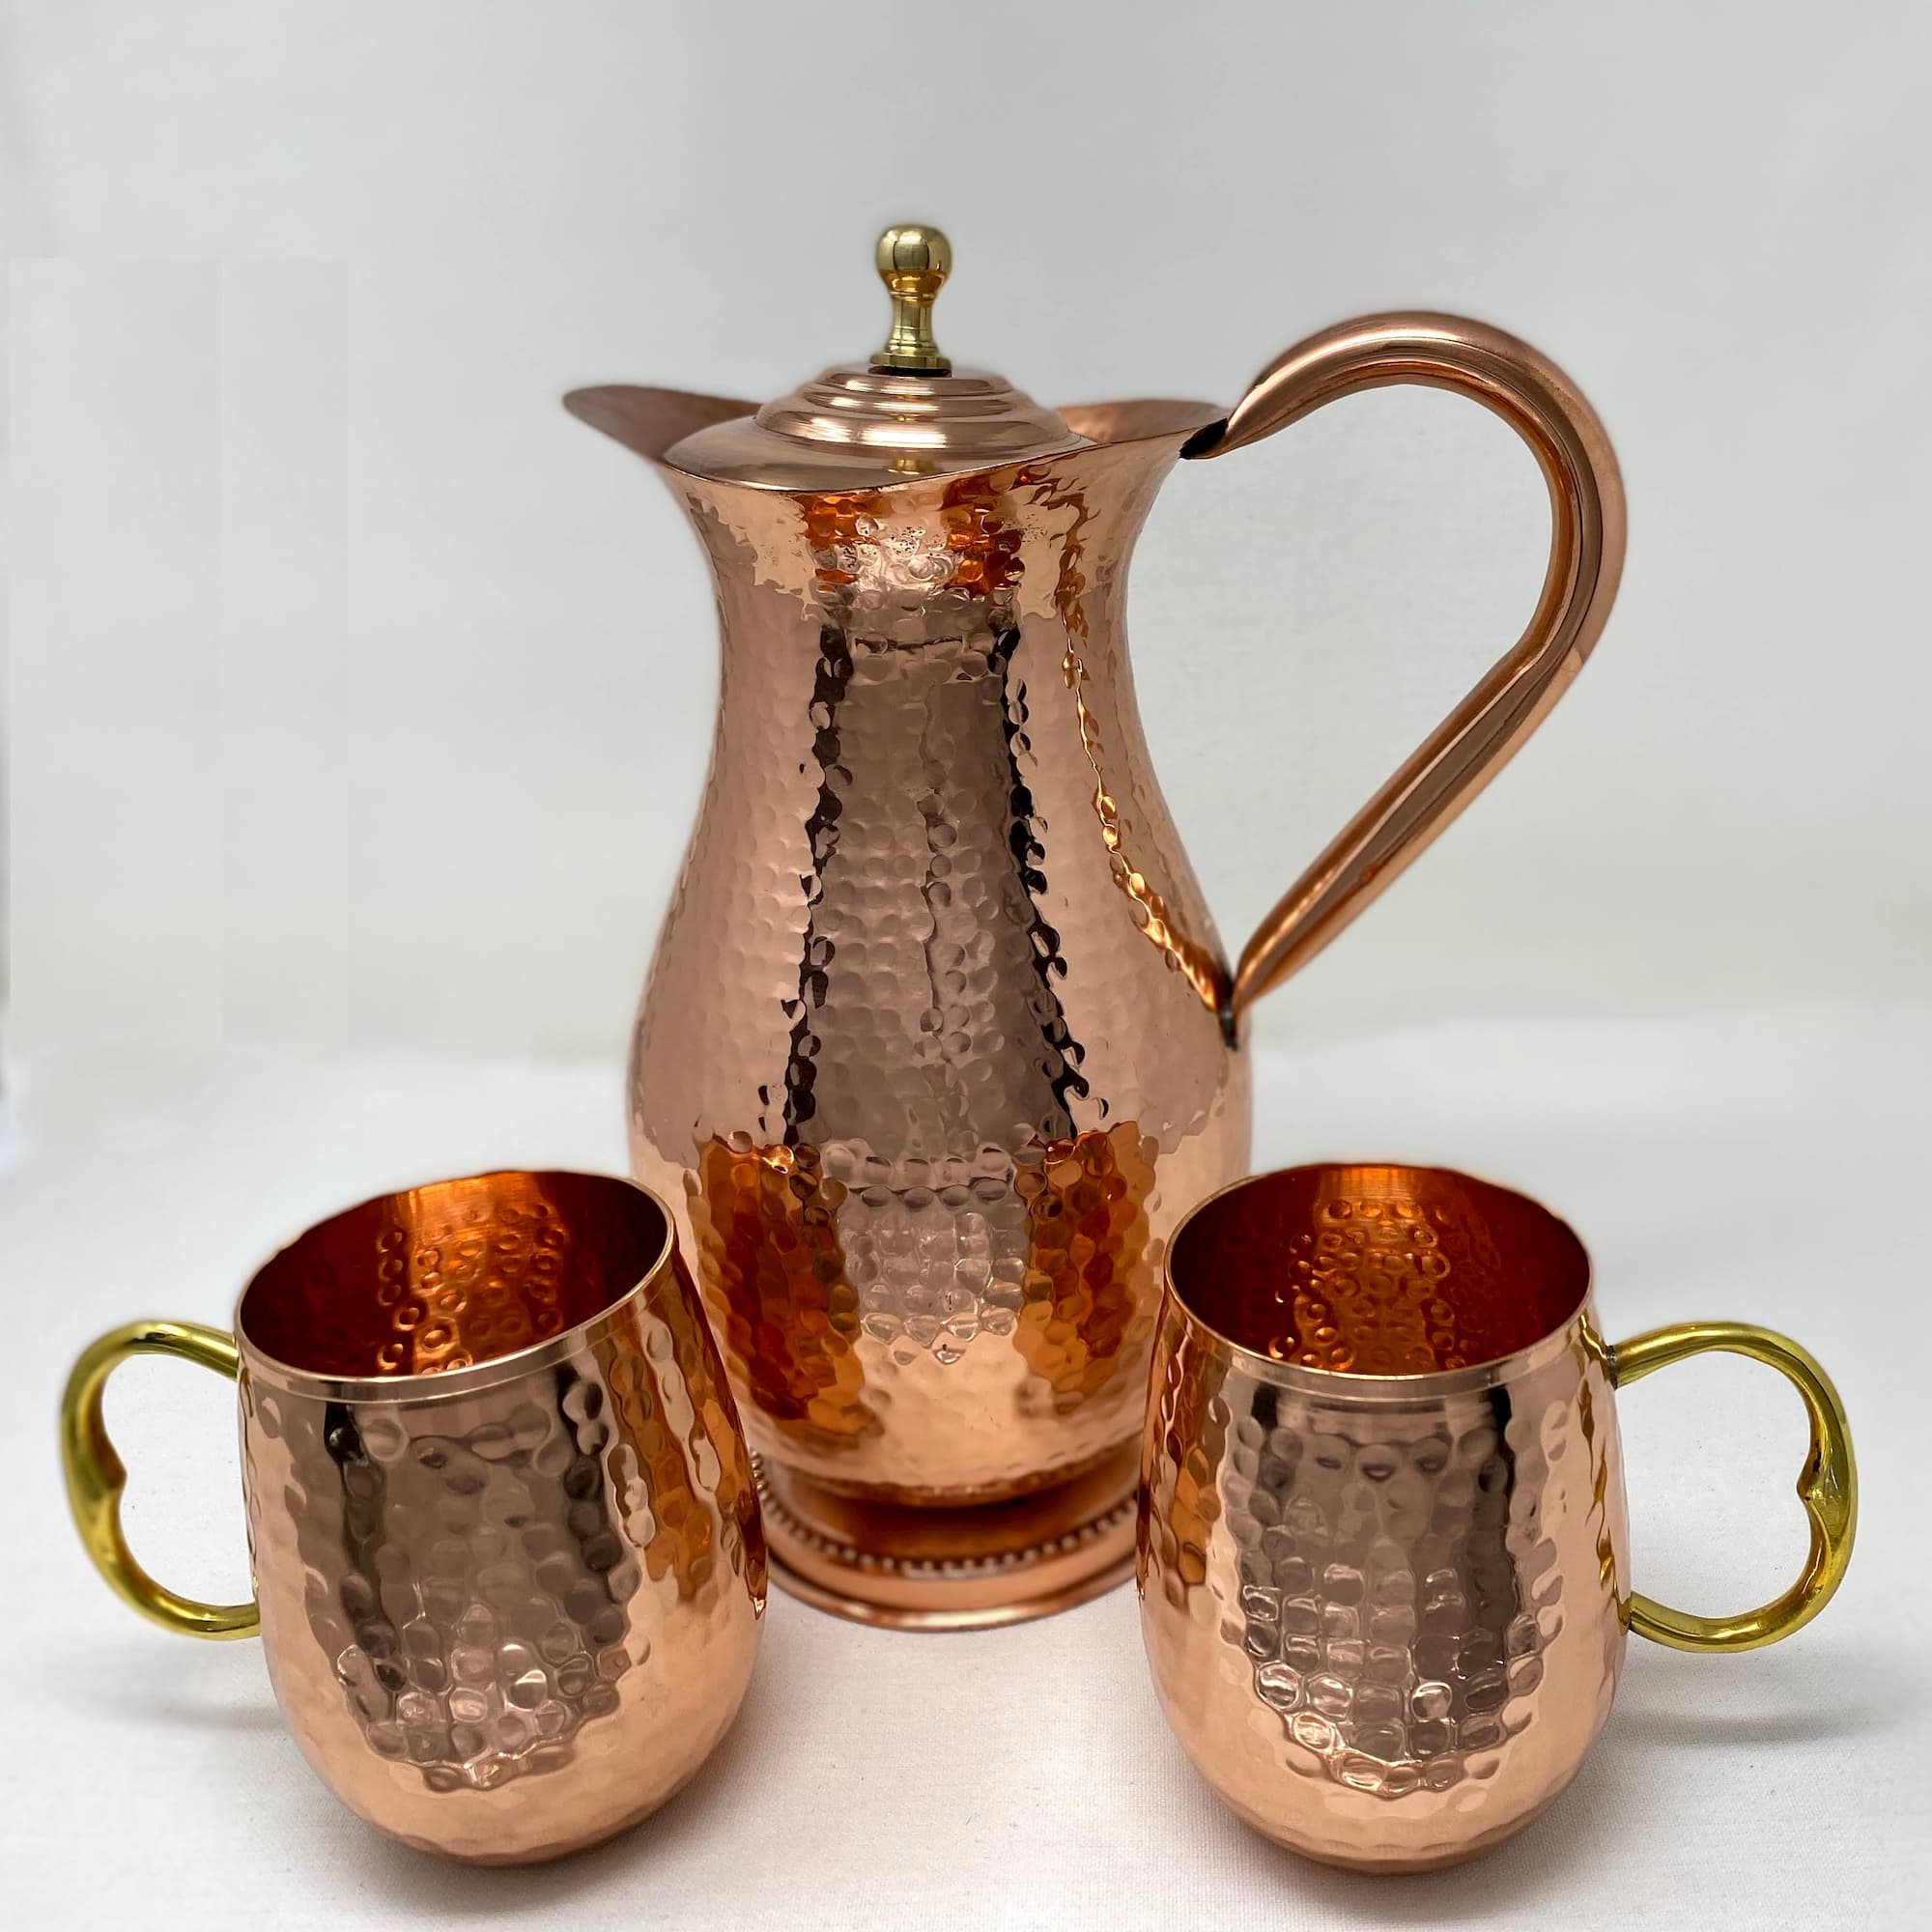 Moscow Mule Hammered Antique Copper Mug - 14 oz